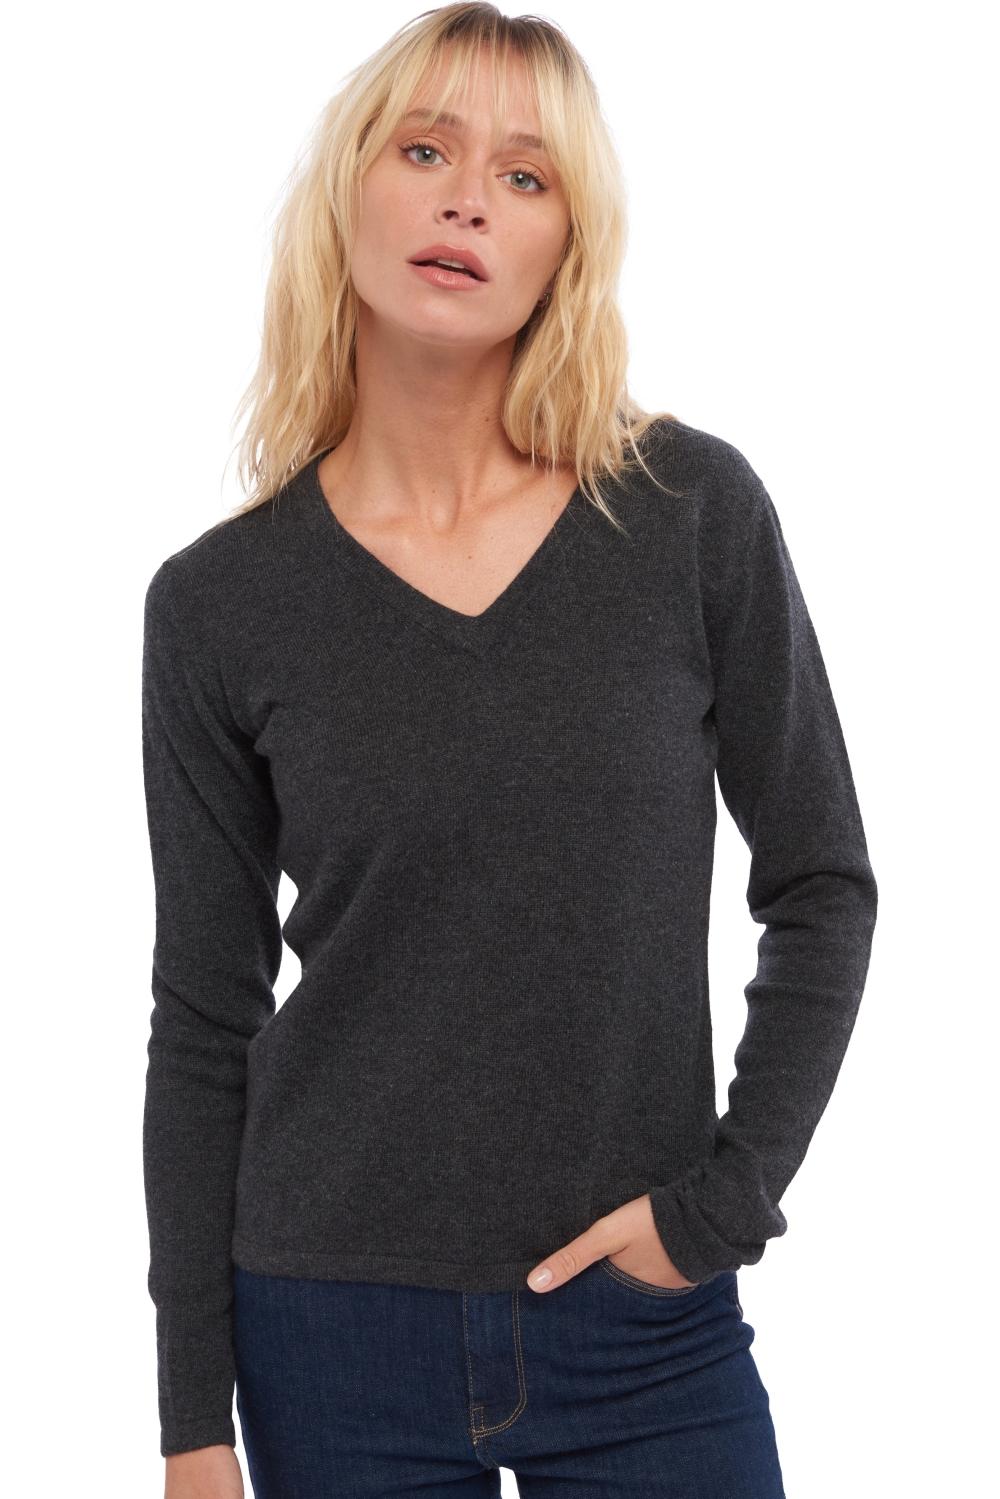 Cachemire pull femme emma anthracite chine s